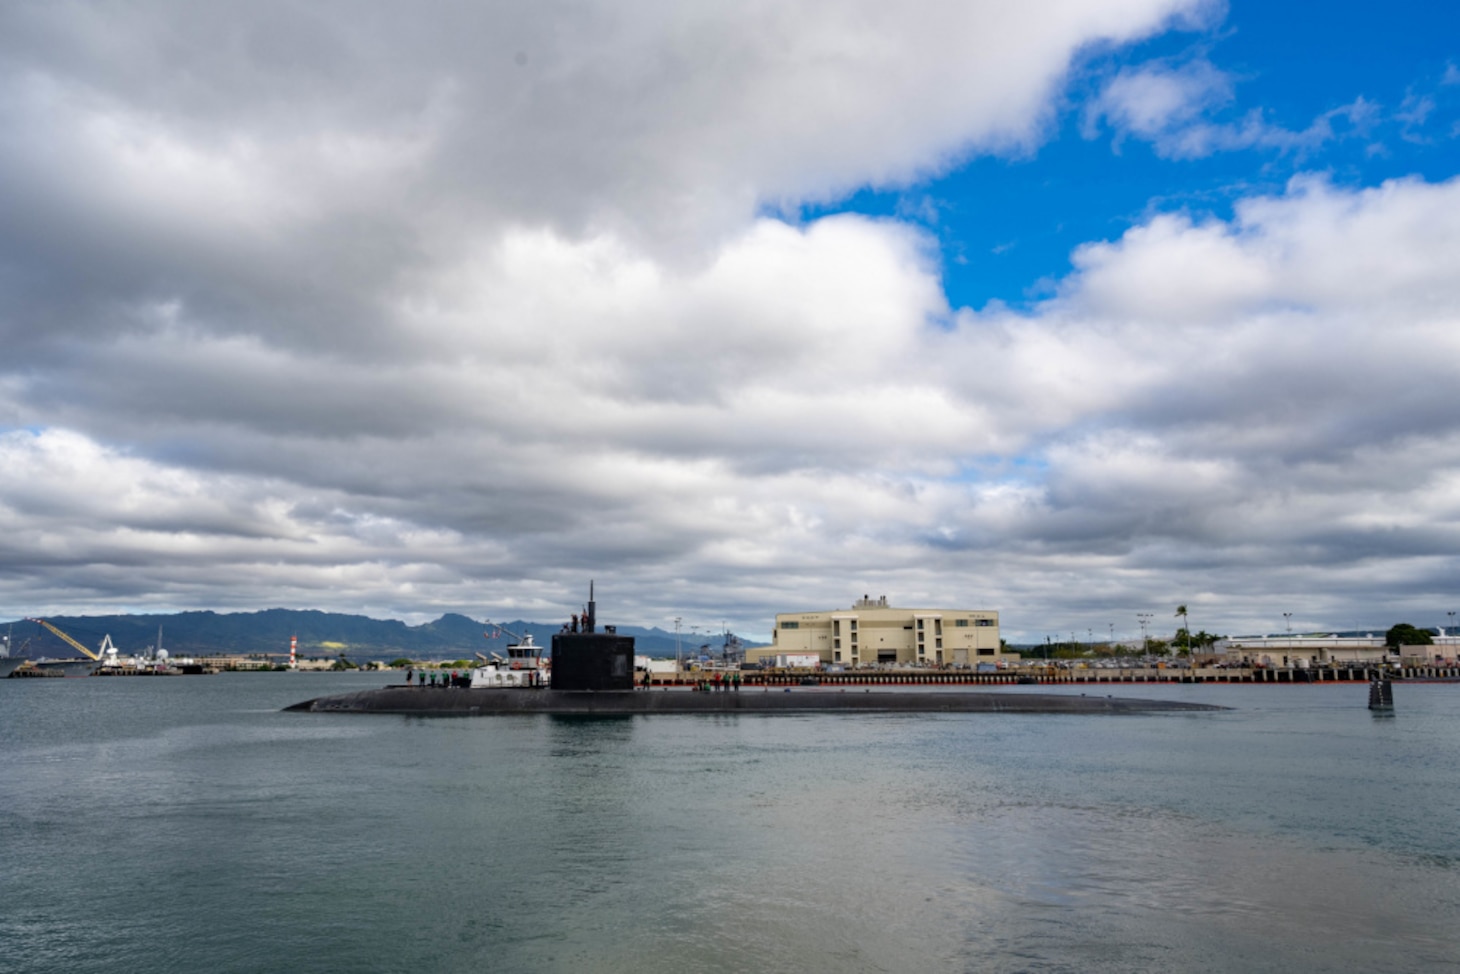 JOINT BASE PEARL HARBOR-HICKAM (June 3, 2021) -- The Los Angeles-class fast-attack submarine USS Columbia (SSN 771) departs Joint Base Pearl Harbor-Hickam for Exercise Agile Dagger 2021 (AD21). AD21 is a training exercise, with one-third of the Pacific Submarine Force getting underway, to assess warfighting readiness and build capacity for the joint force. (U.S. Navy photo by Chief Mass Communication Specialist Amanda R. Gray/Released)